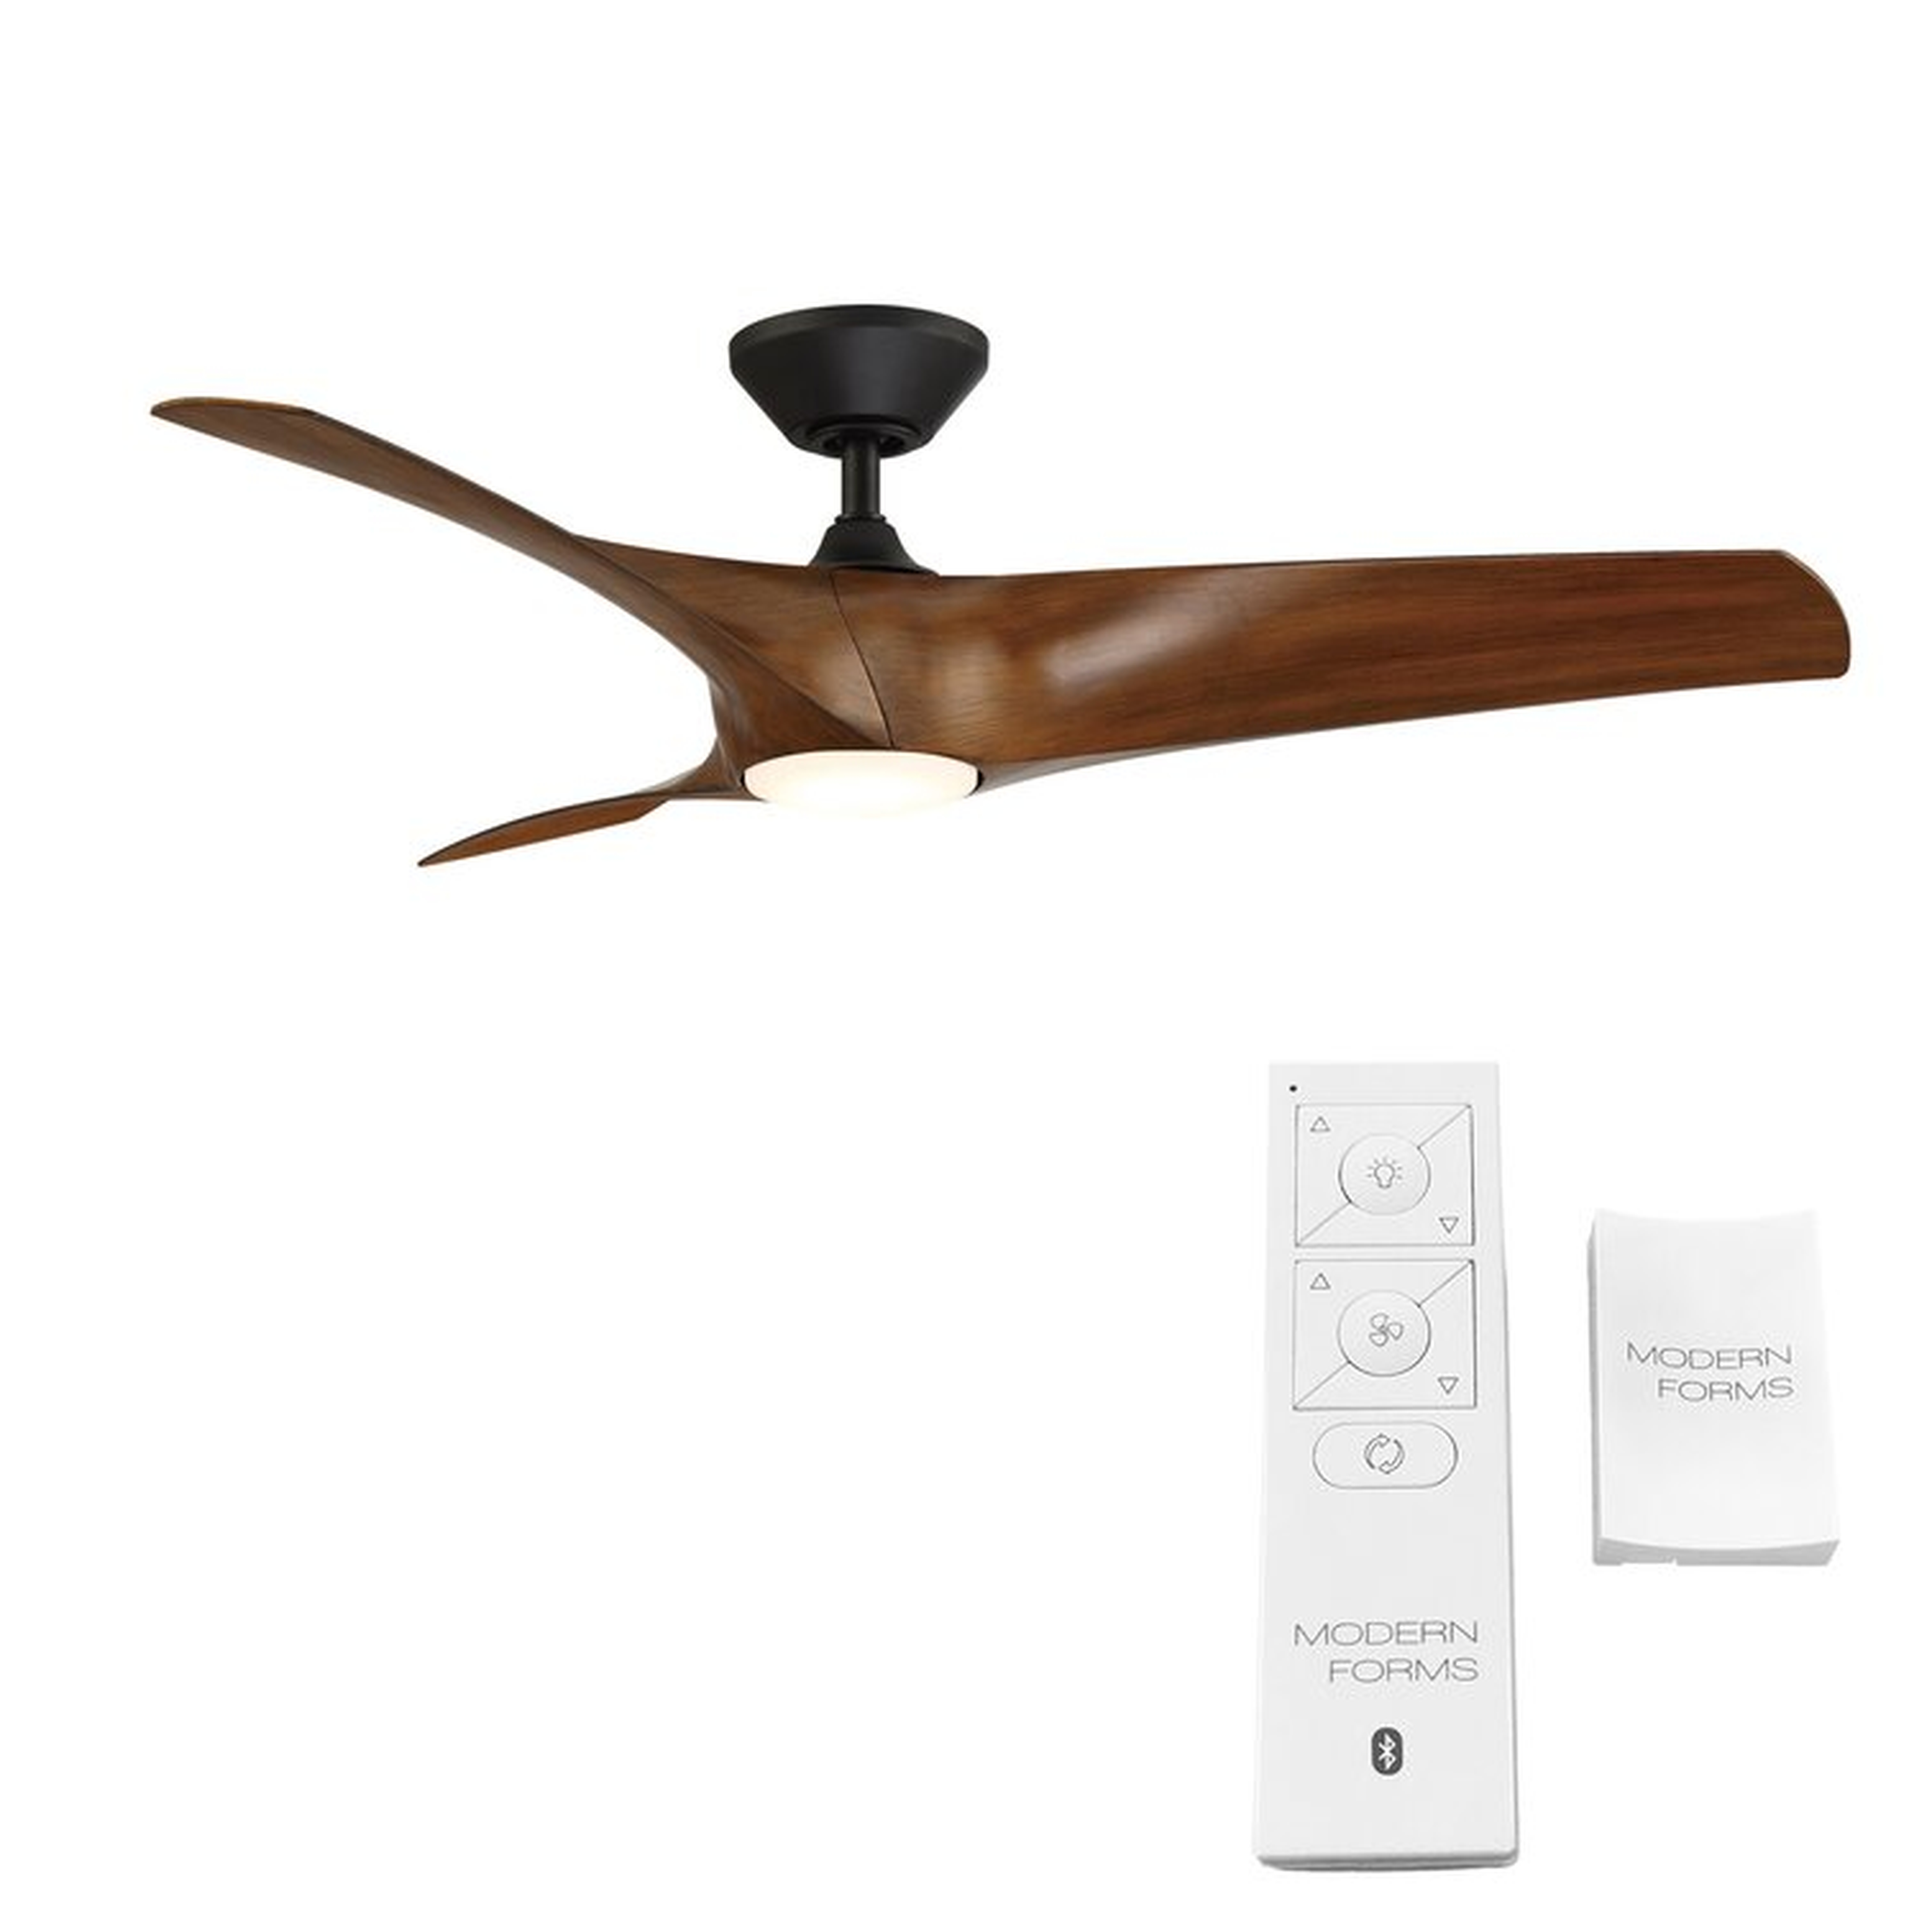 Zephyr 3 - Blade Smart Propeller Ceiling Fan with Light Kit Included - Perigold